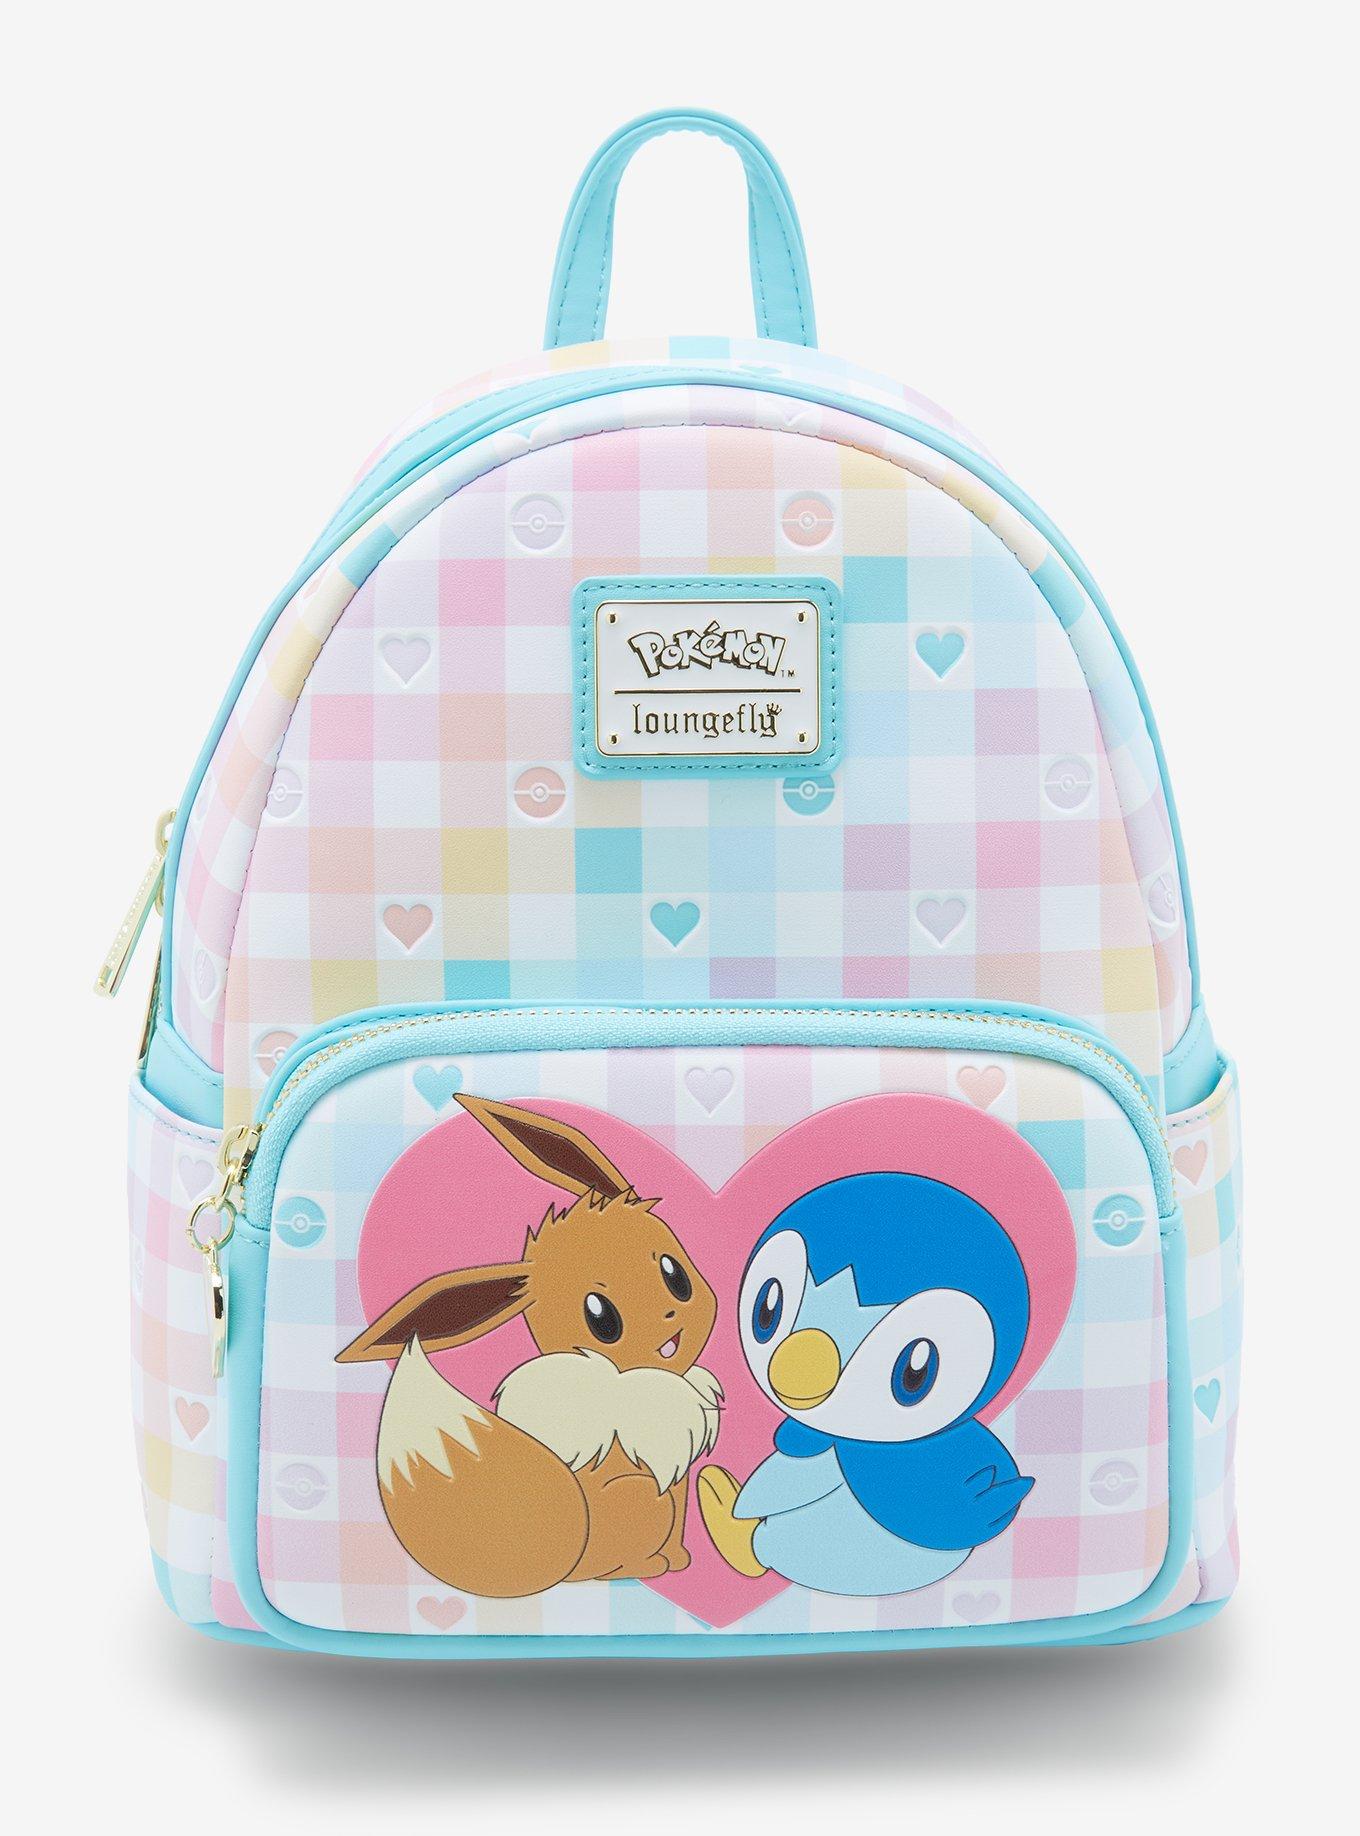 Loungefly Eevee Piplup Mini Backpack - BoxLunch Exclusive | BoxLunch